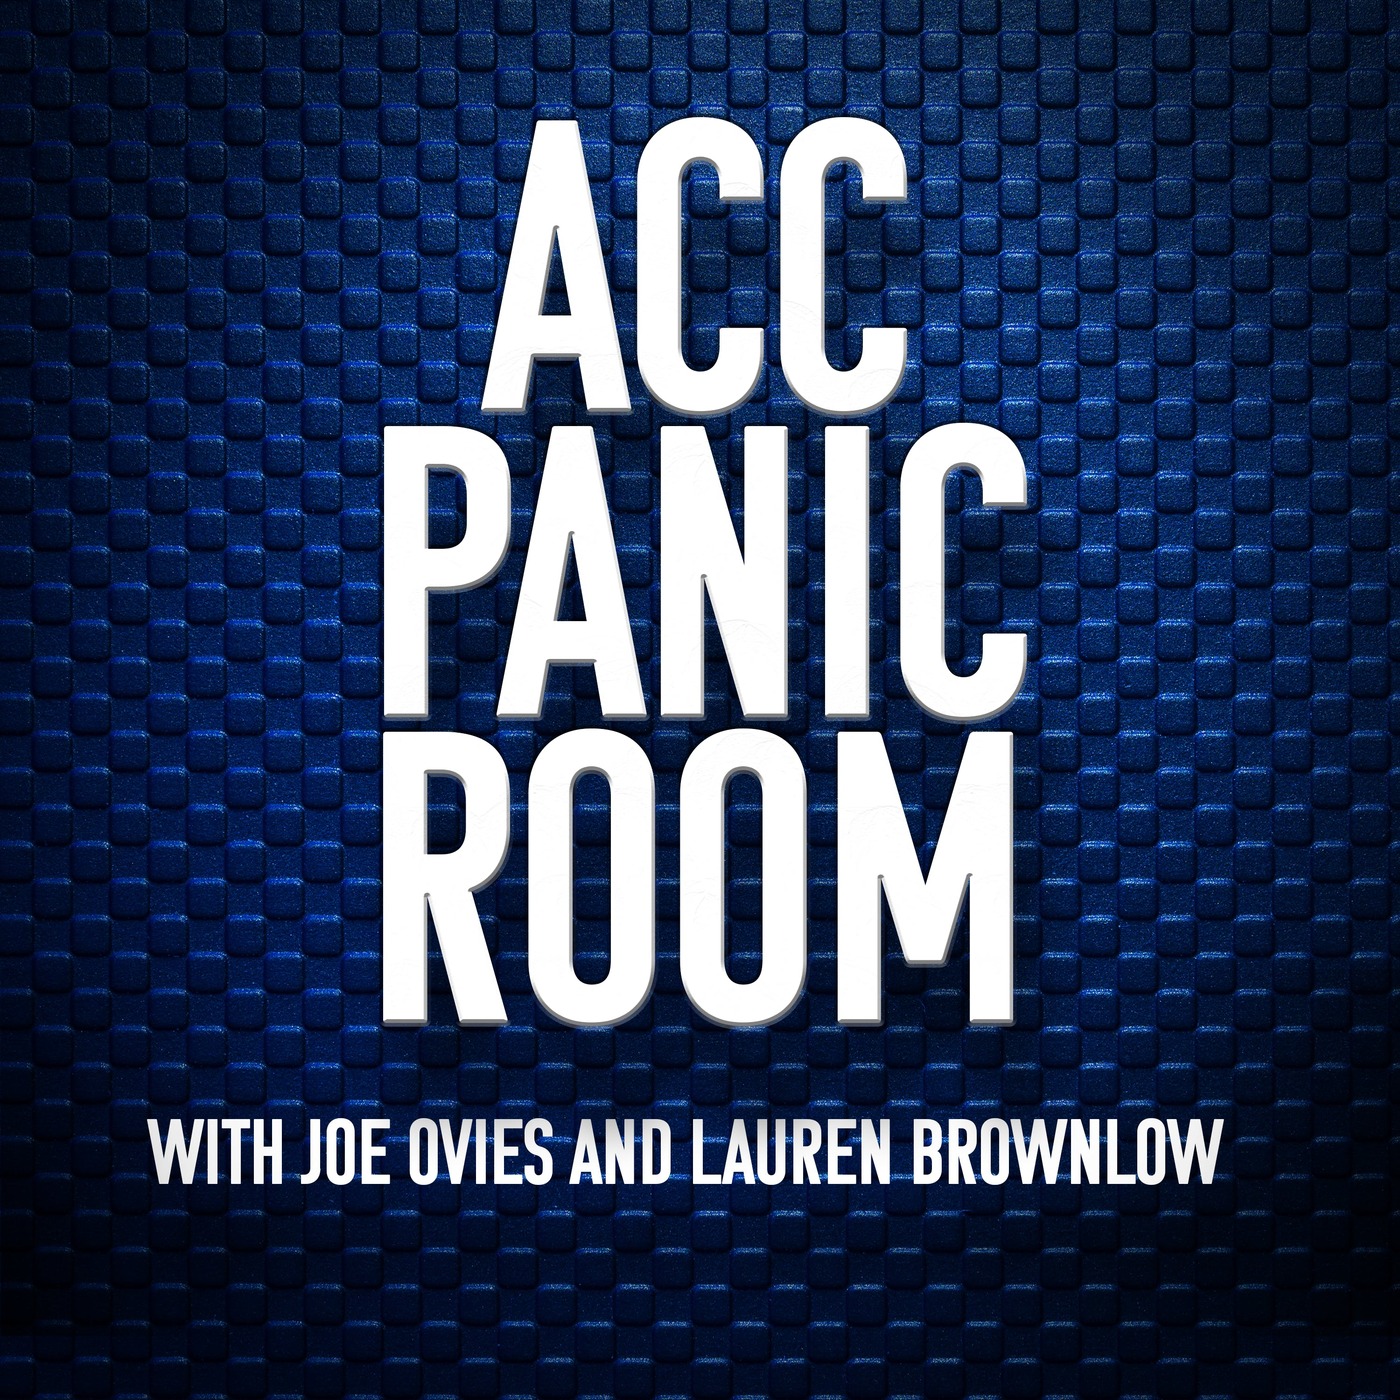 Who are the early season surprises and disappointments in the ACC?